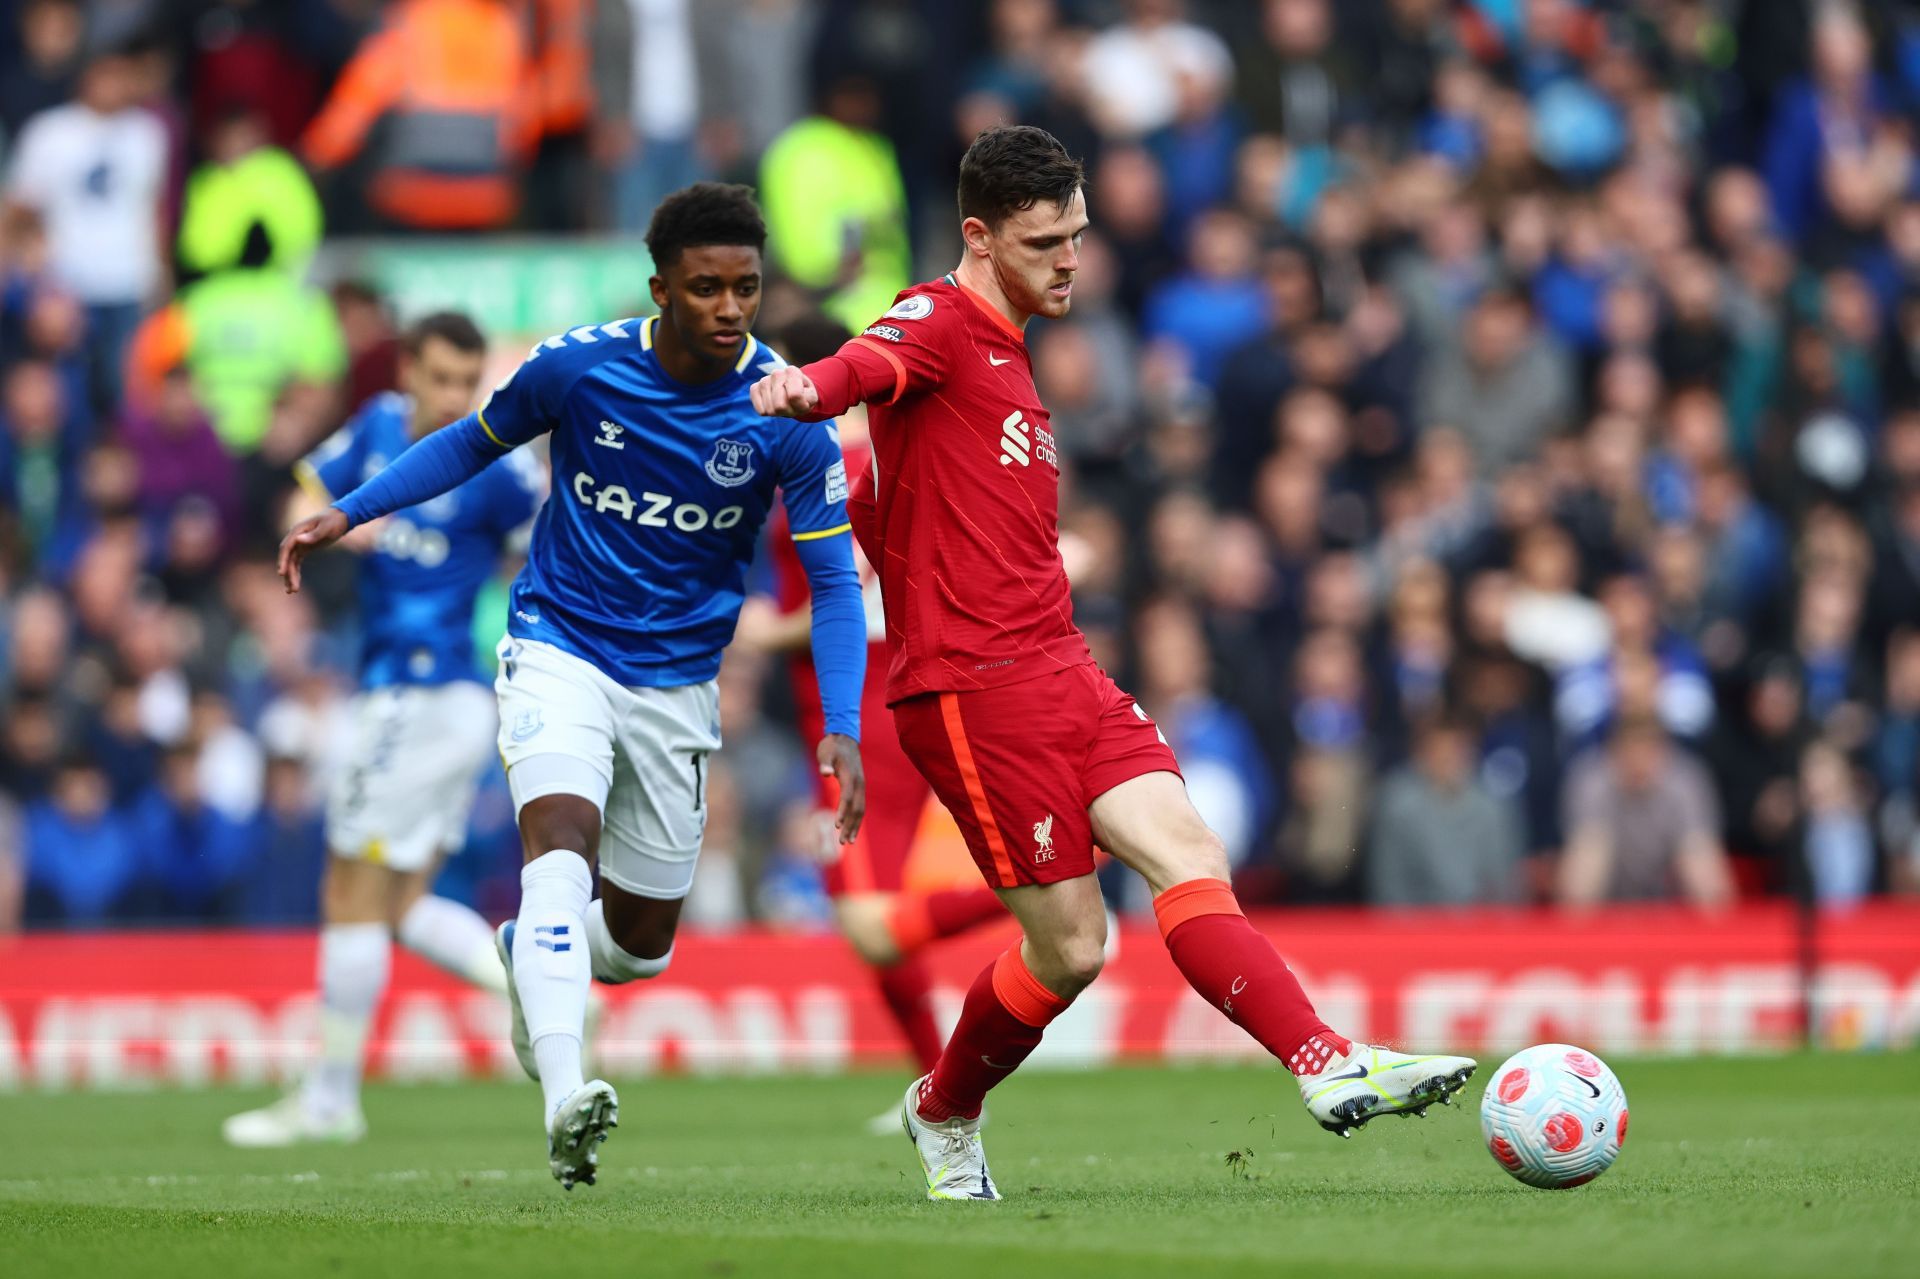 Robertson in action for the Reds